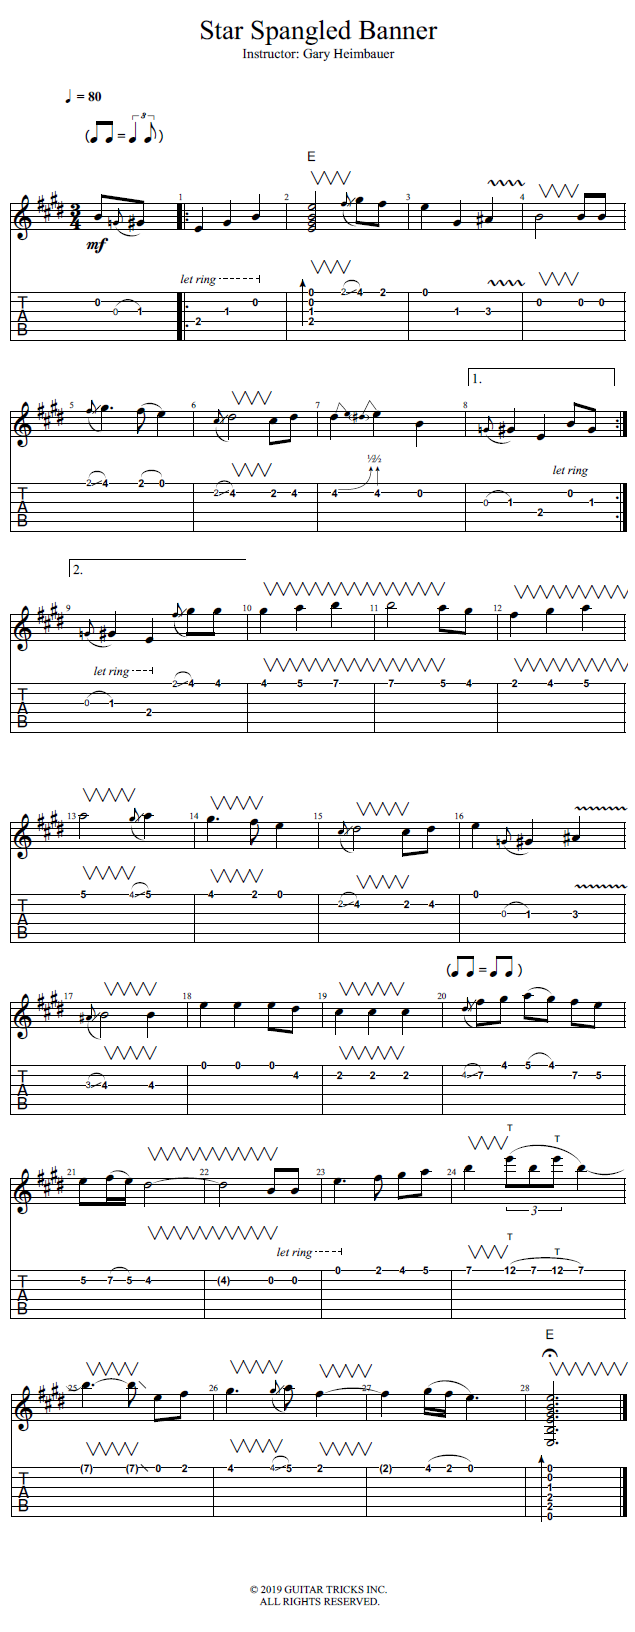 Star Spangled Banner song notation